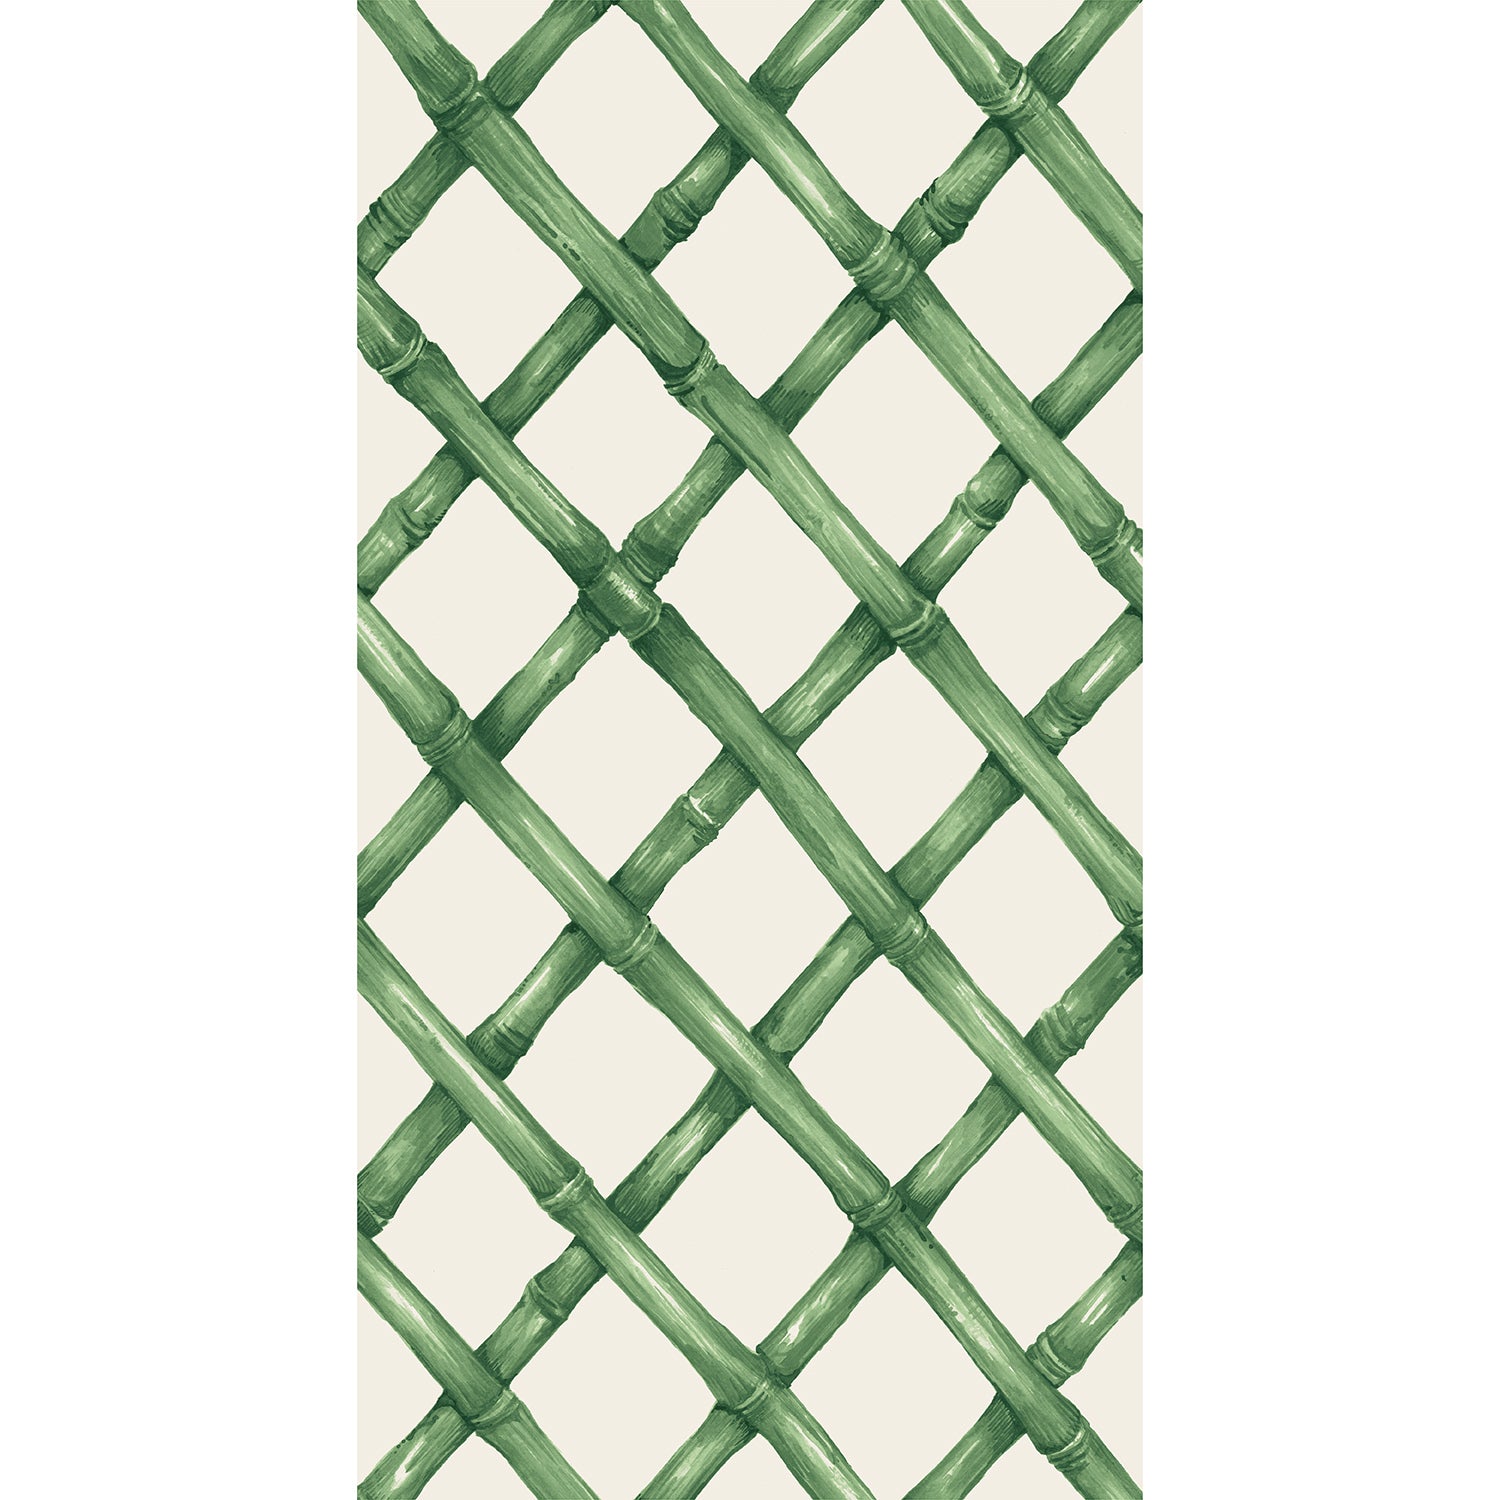 A diagonal woven bamboo pattern in monochrome green on a white background, on a rectangle guest napkin.